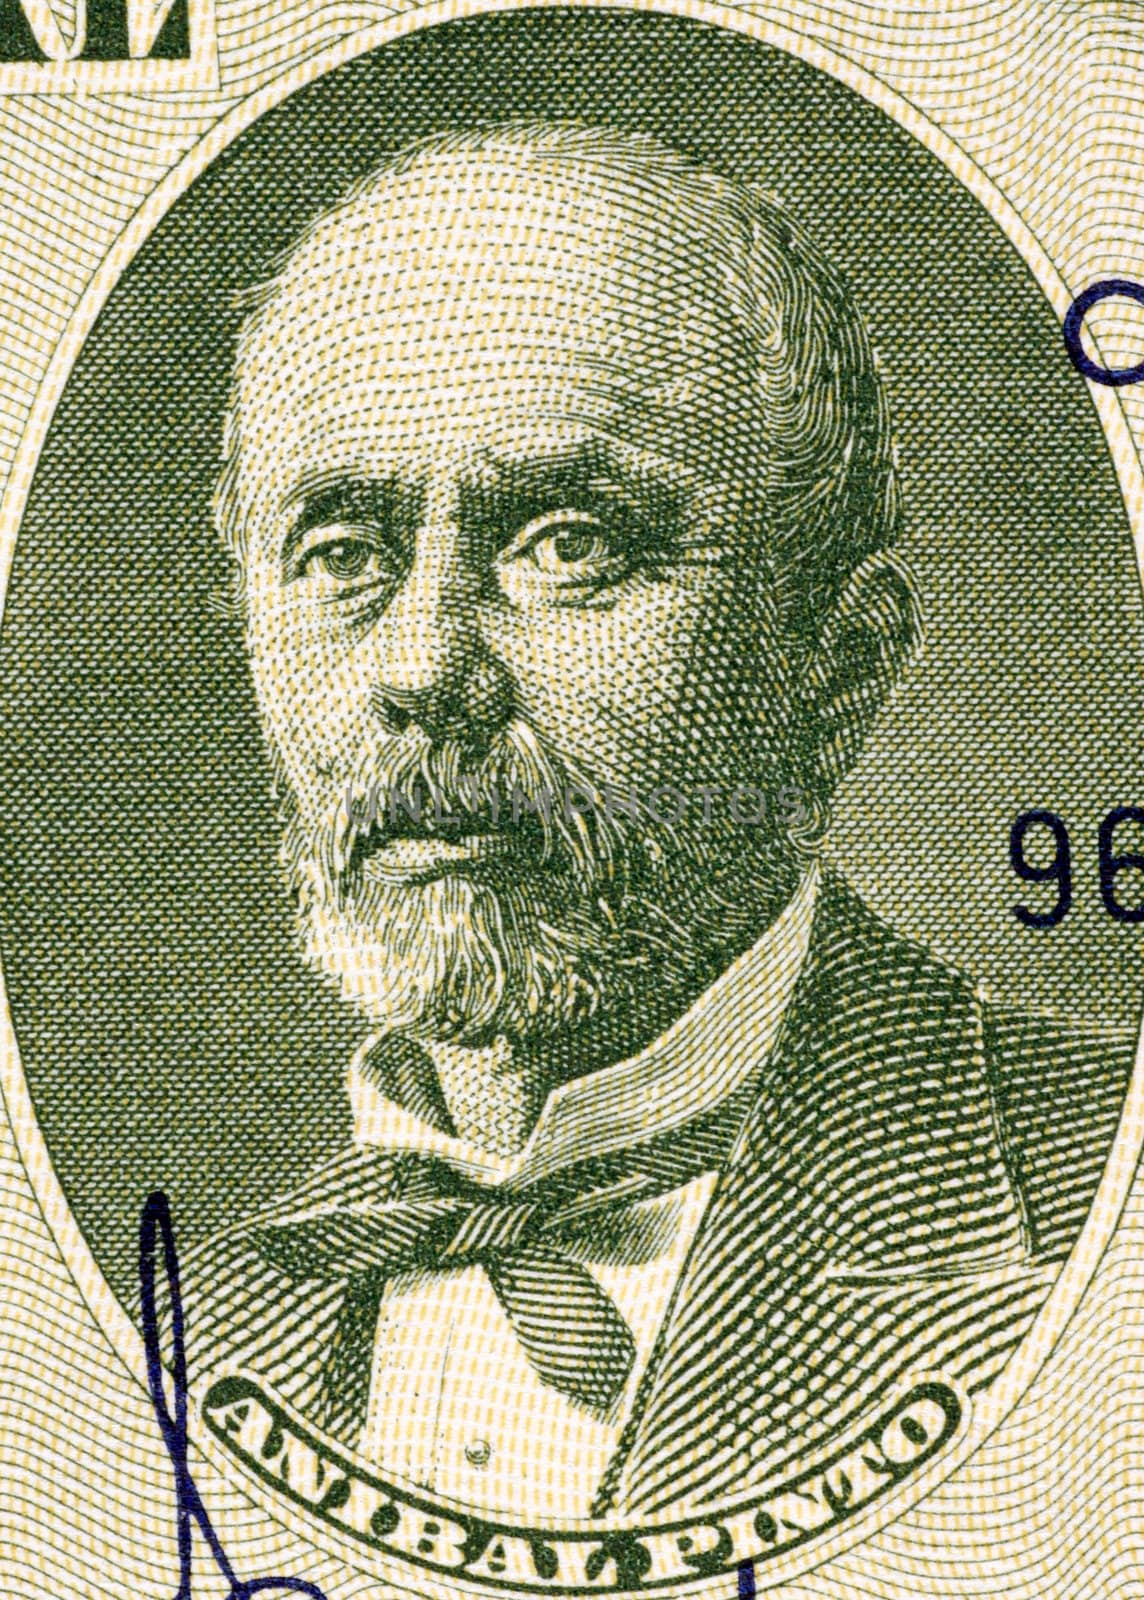 Anibal Pinto (1825-1884) on 5 Centimos on 50 Pesos 1960 Banknote from Chile. President of Chile during 1876-1881.